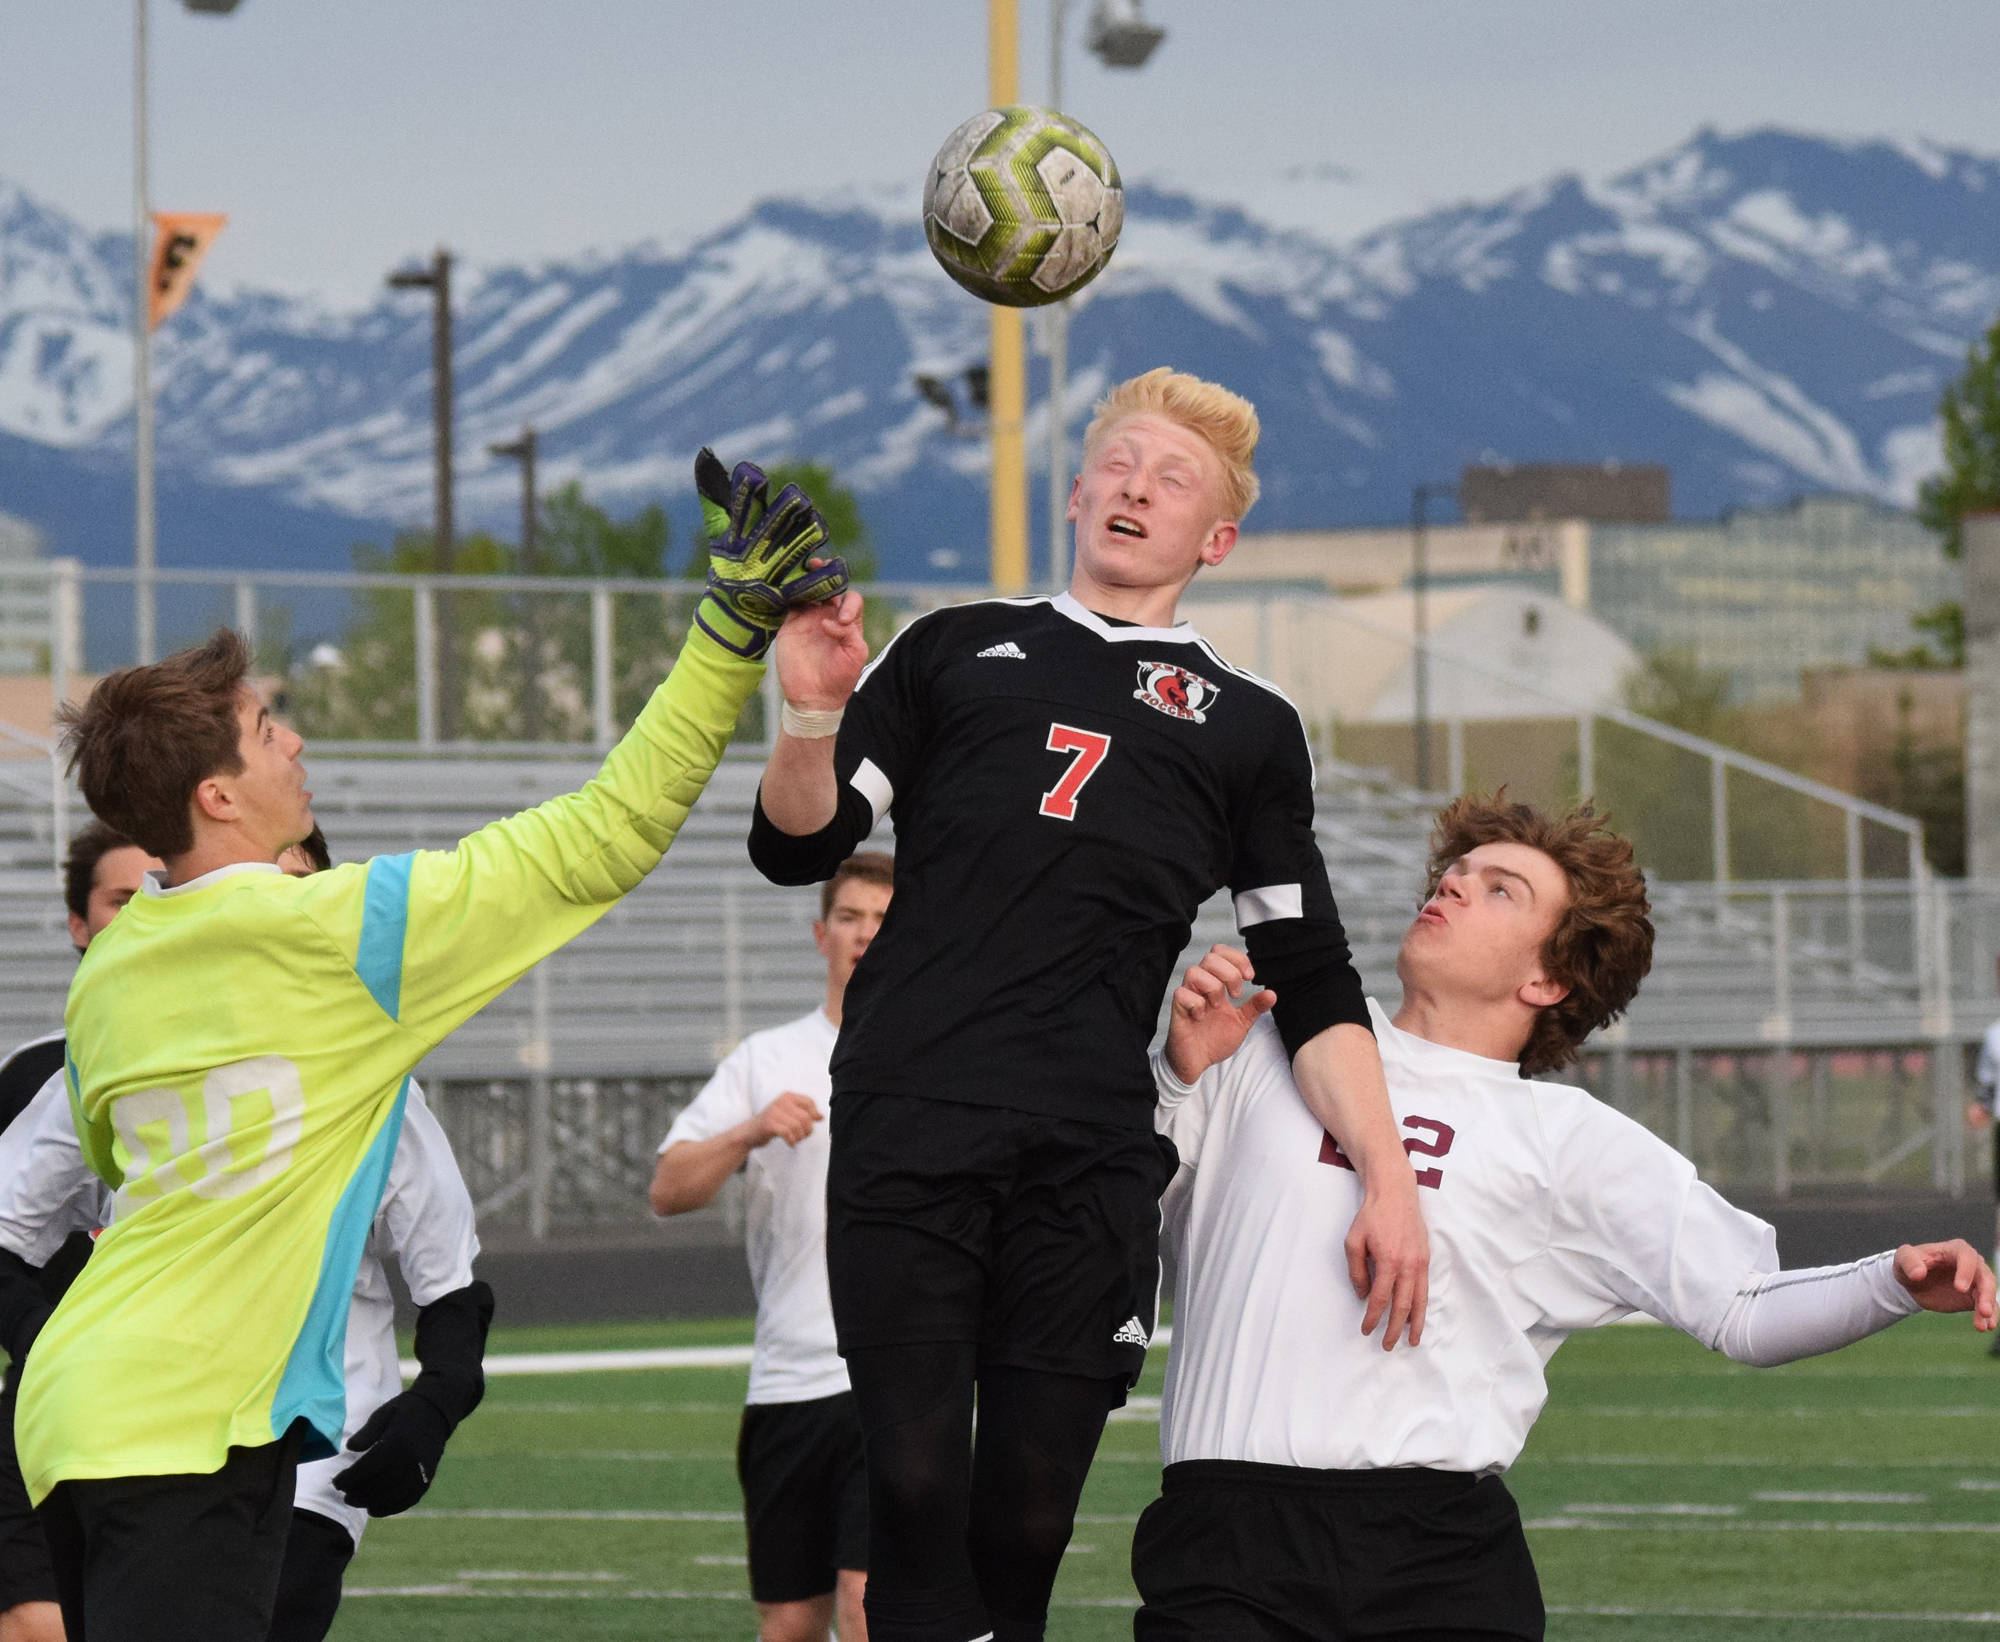 Kenai’s Leif Lofquist gets his head on a ball against Grace Christian Thursday, May 23, 2019, at the Div. II state soccer championships at West High School. (Photo by Joey Klecka/Peninsula Clarion)